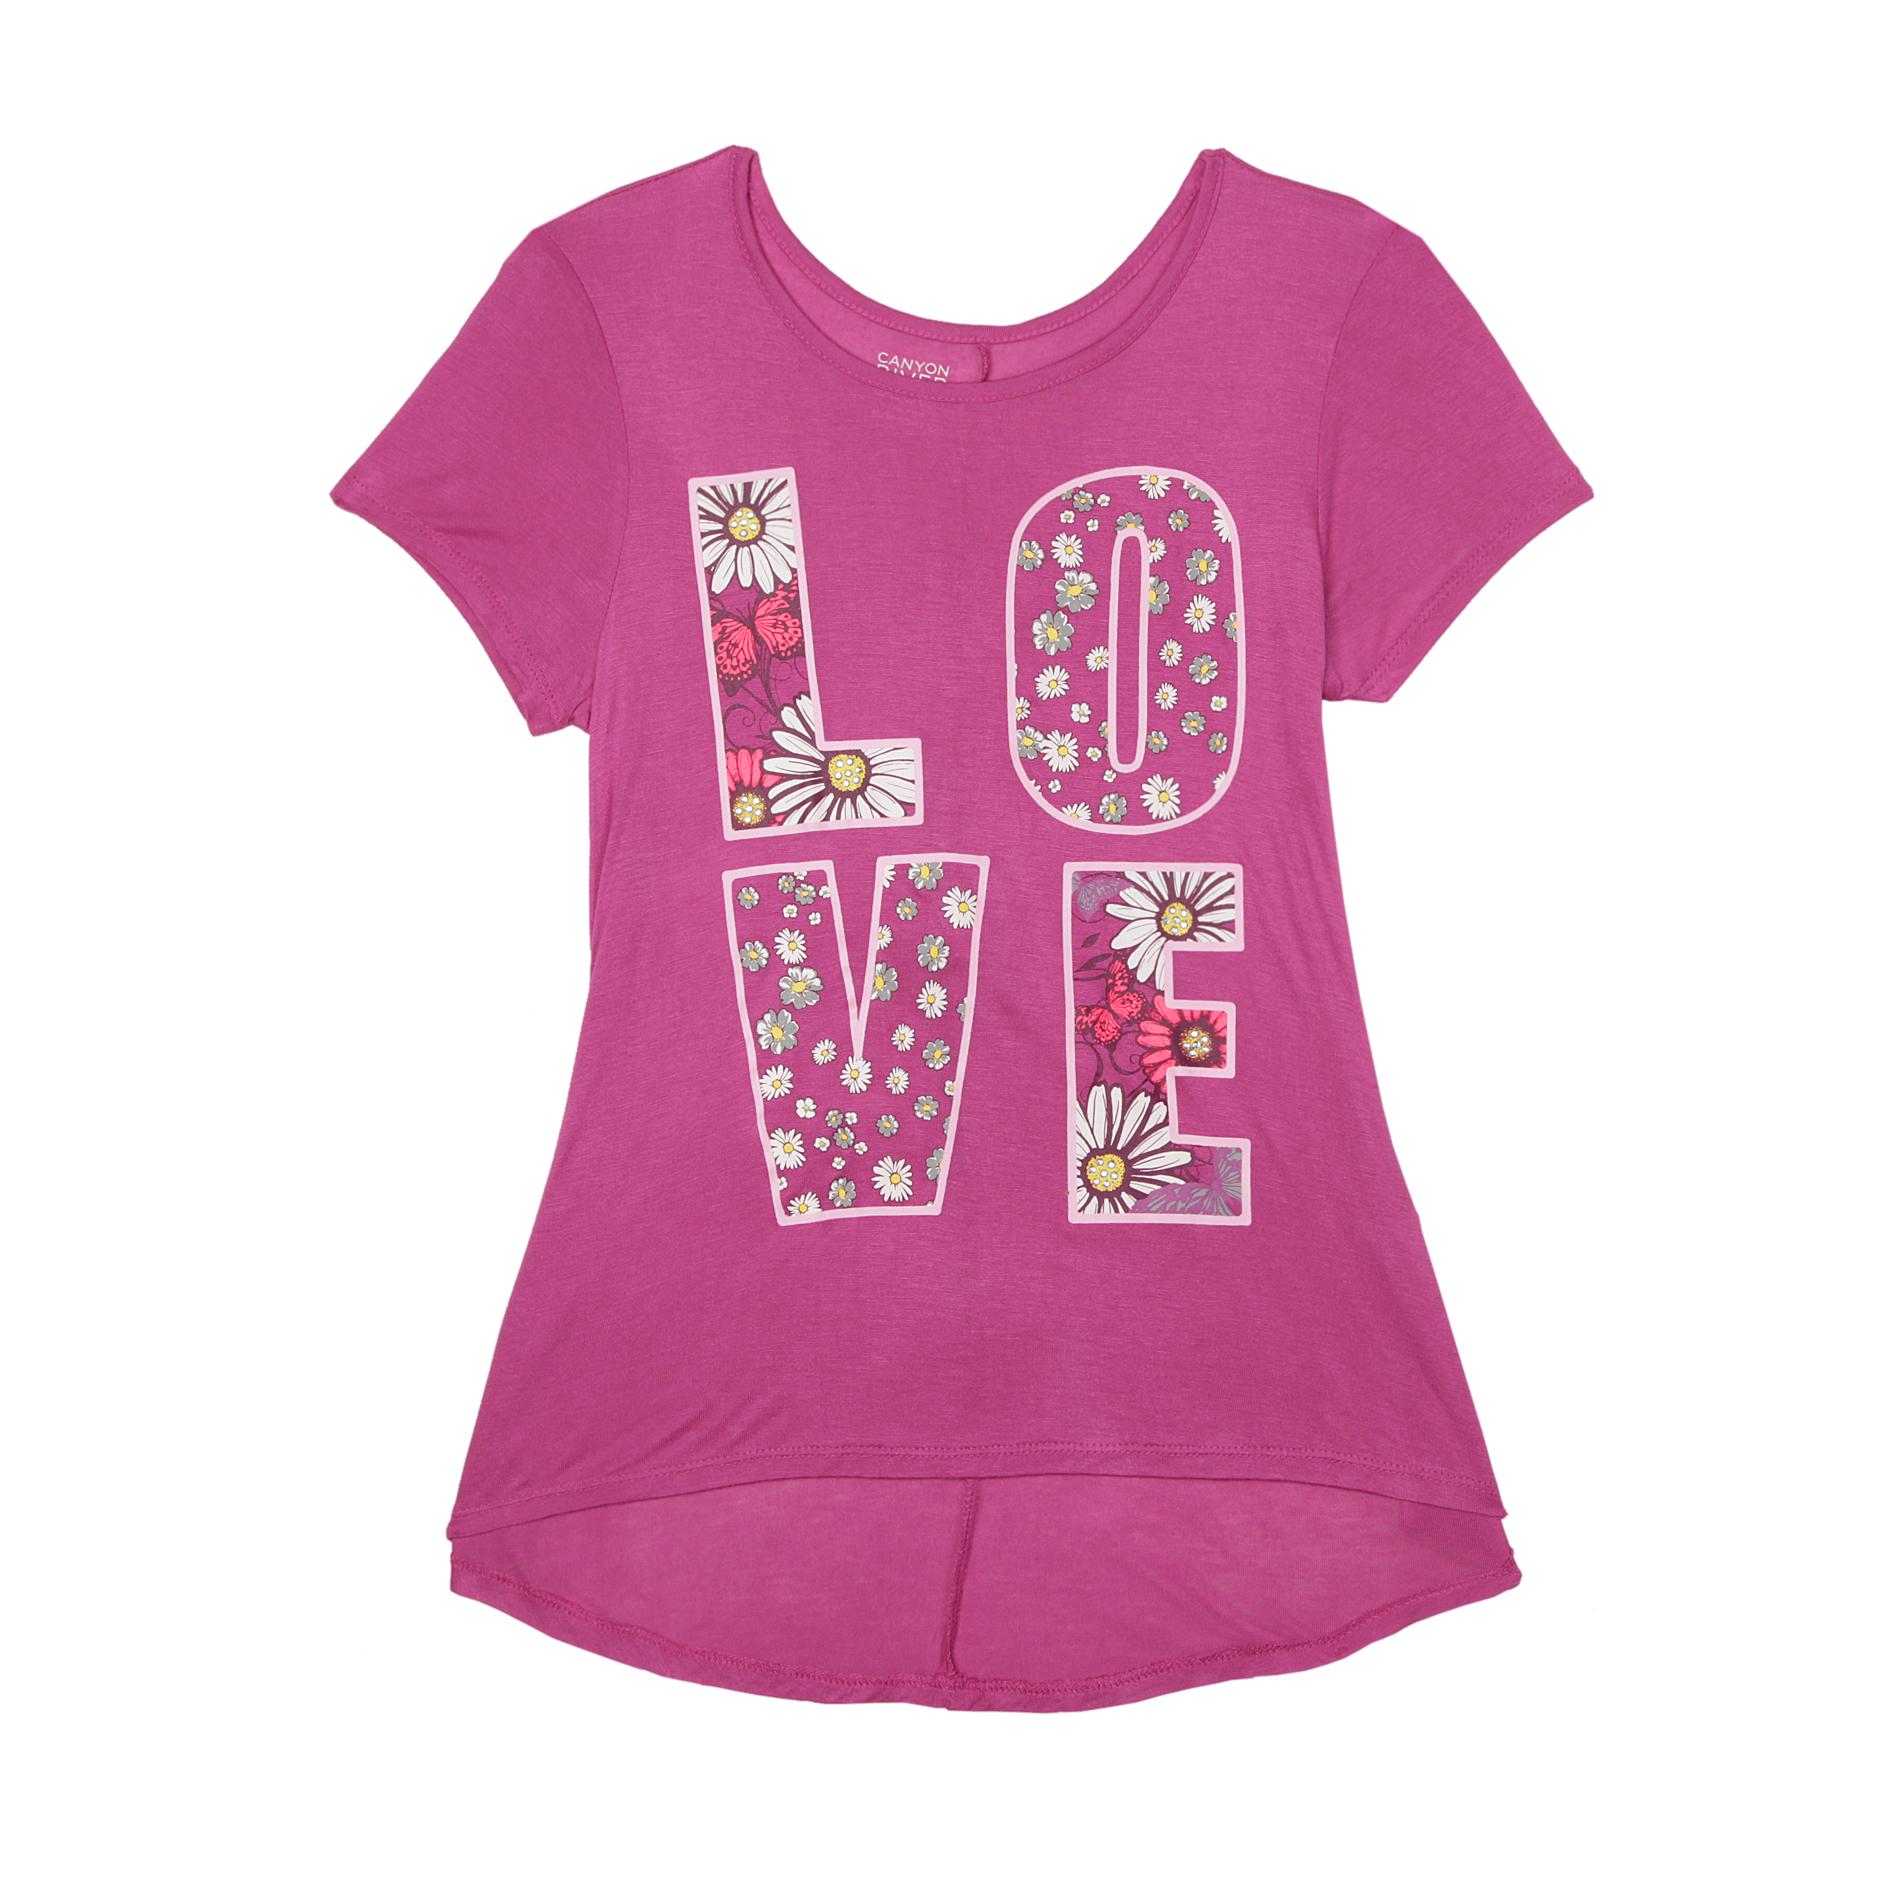 Canyon River Blues Girl's High-Low Hem Graphic T-Shirt - Floral Love